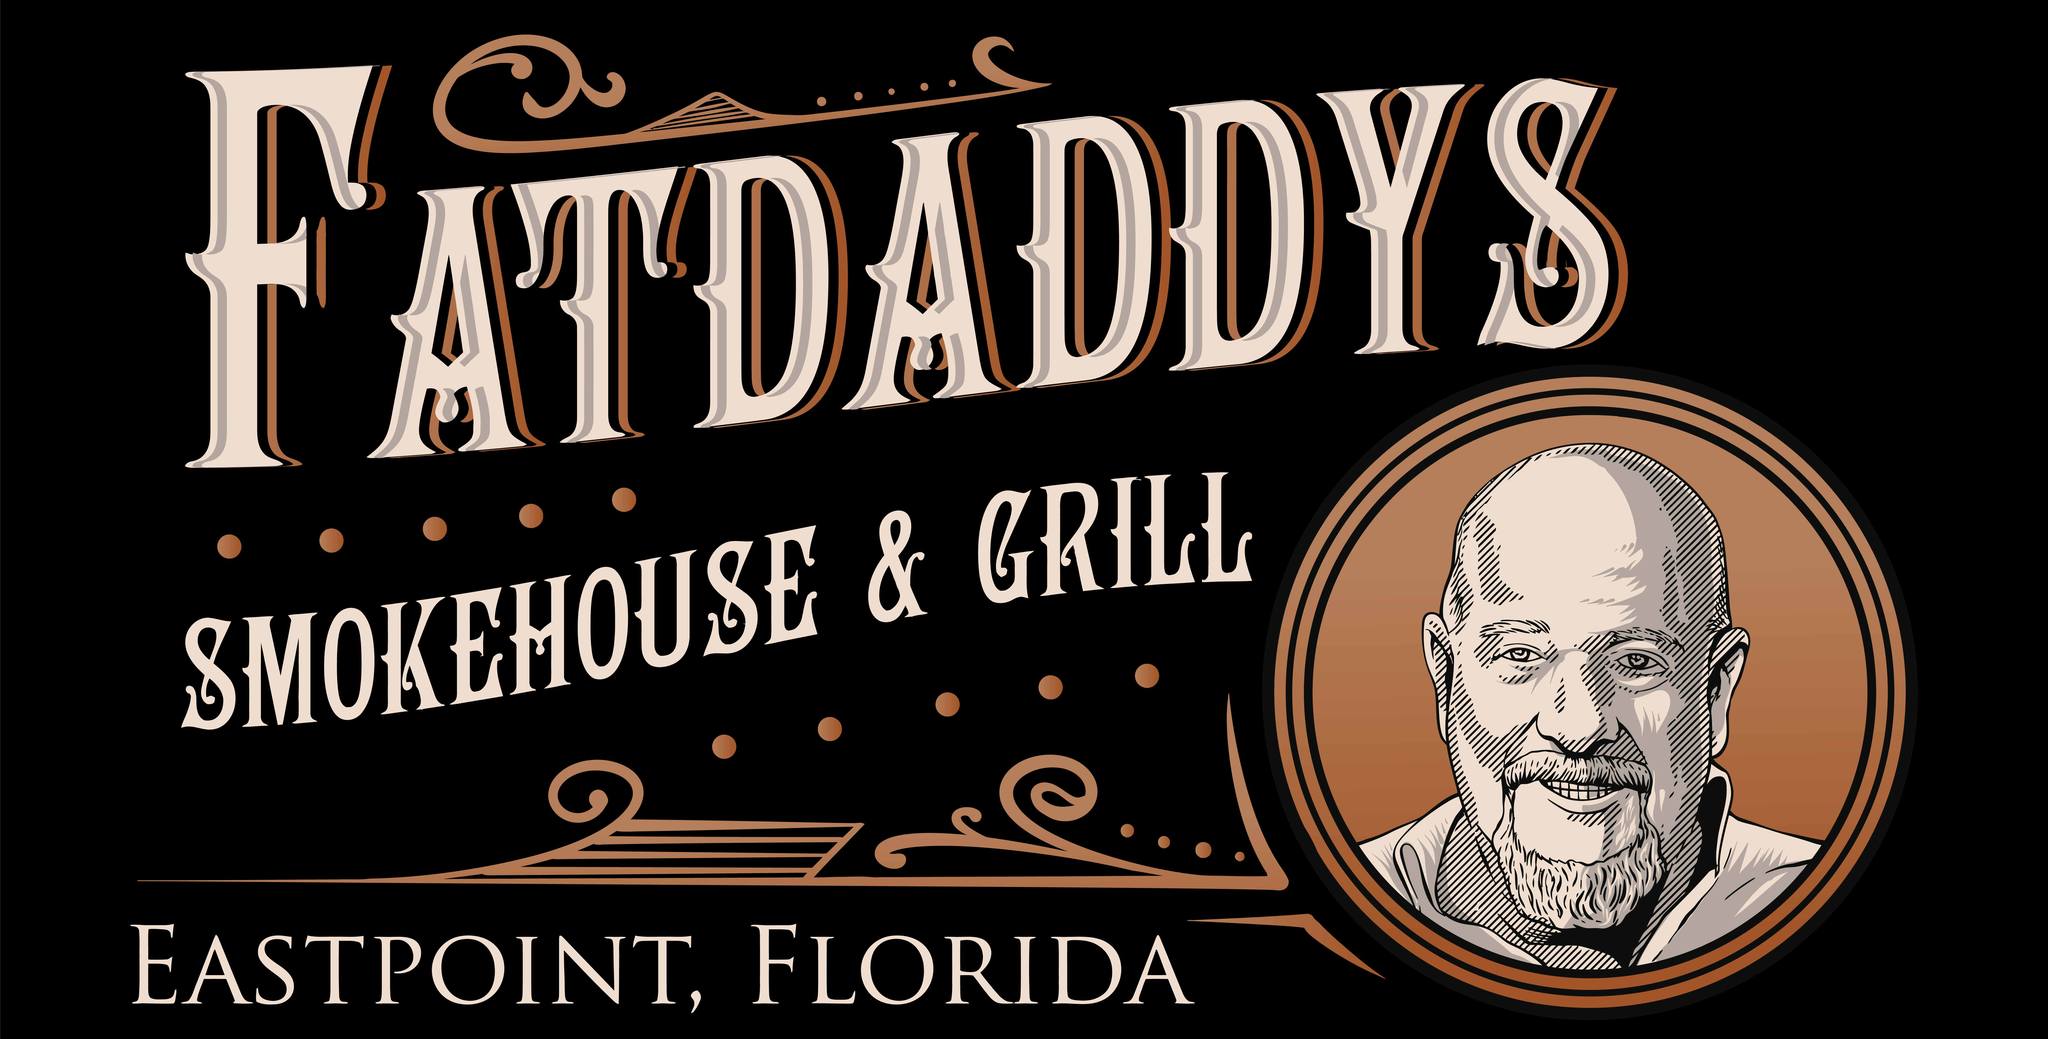 FatDaddy’s Smokehouse and Grill